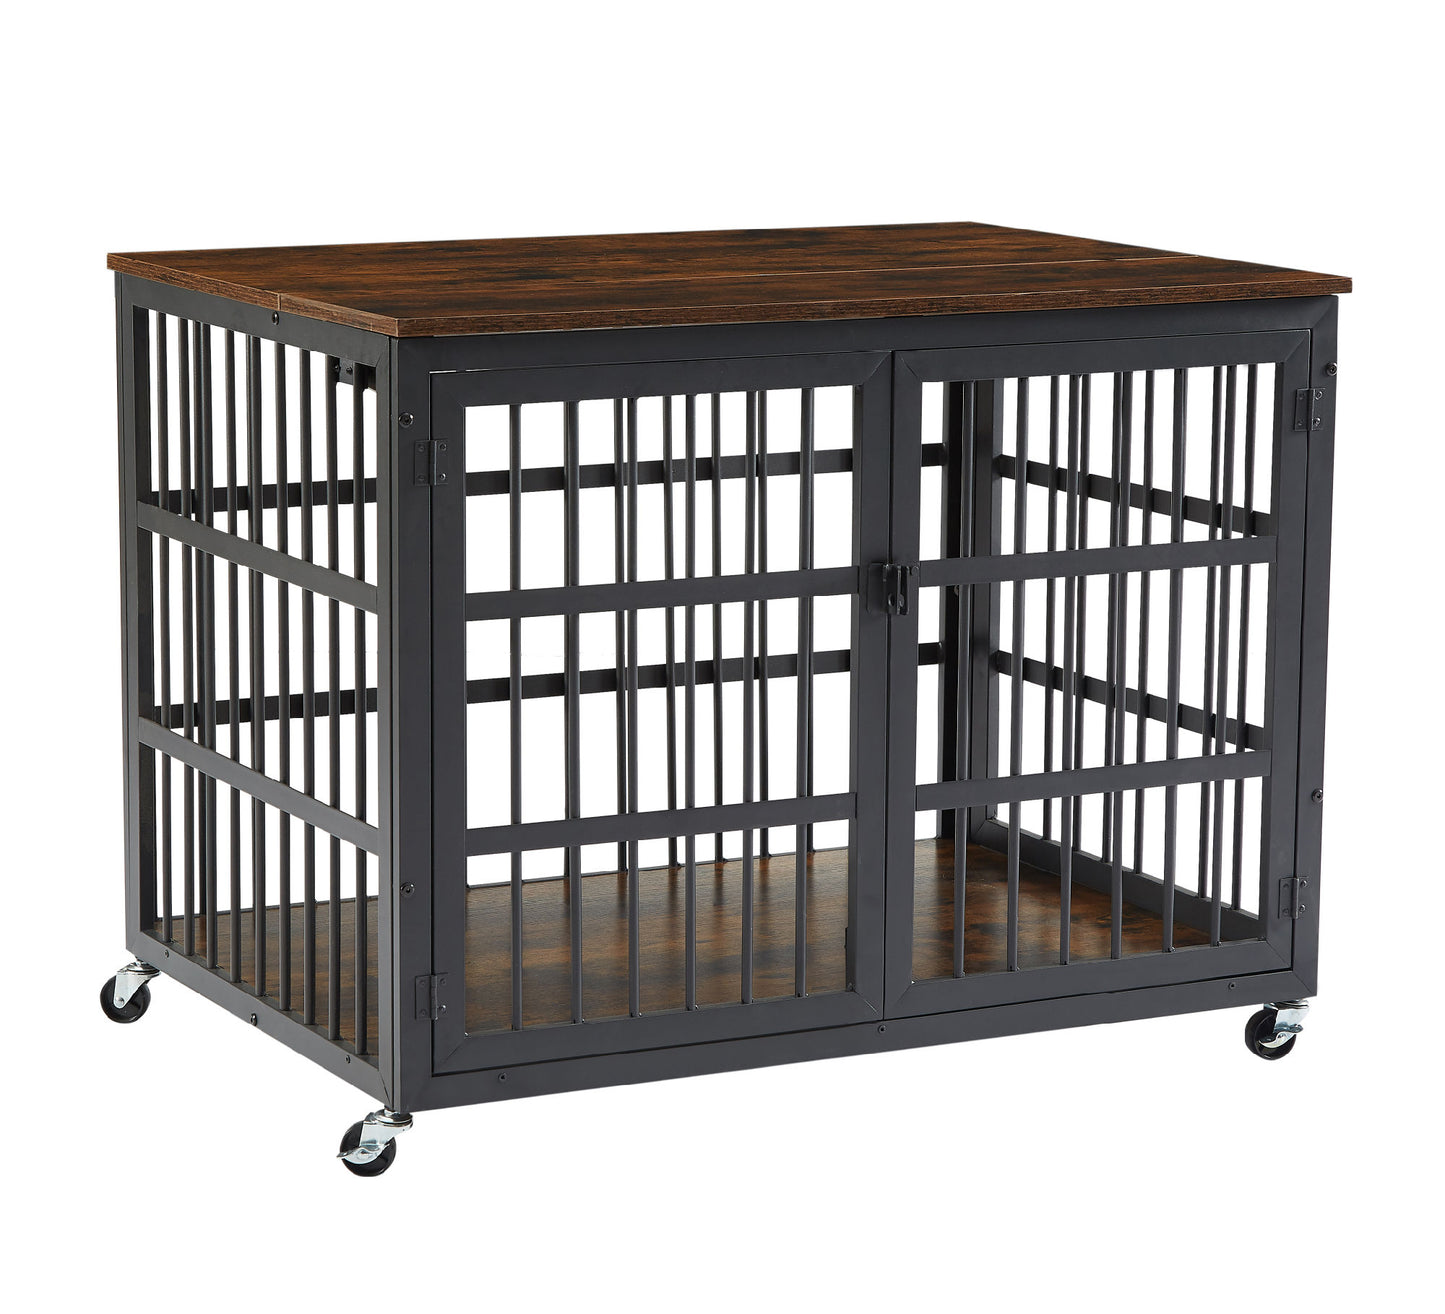 Furniture style dog crate wrought iron frame door with side openings, Grey, 38.4''W x 27.7''D x 30.2''H.